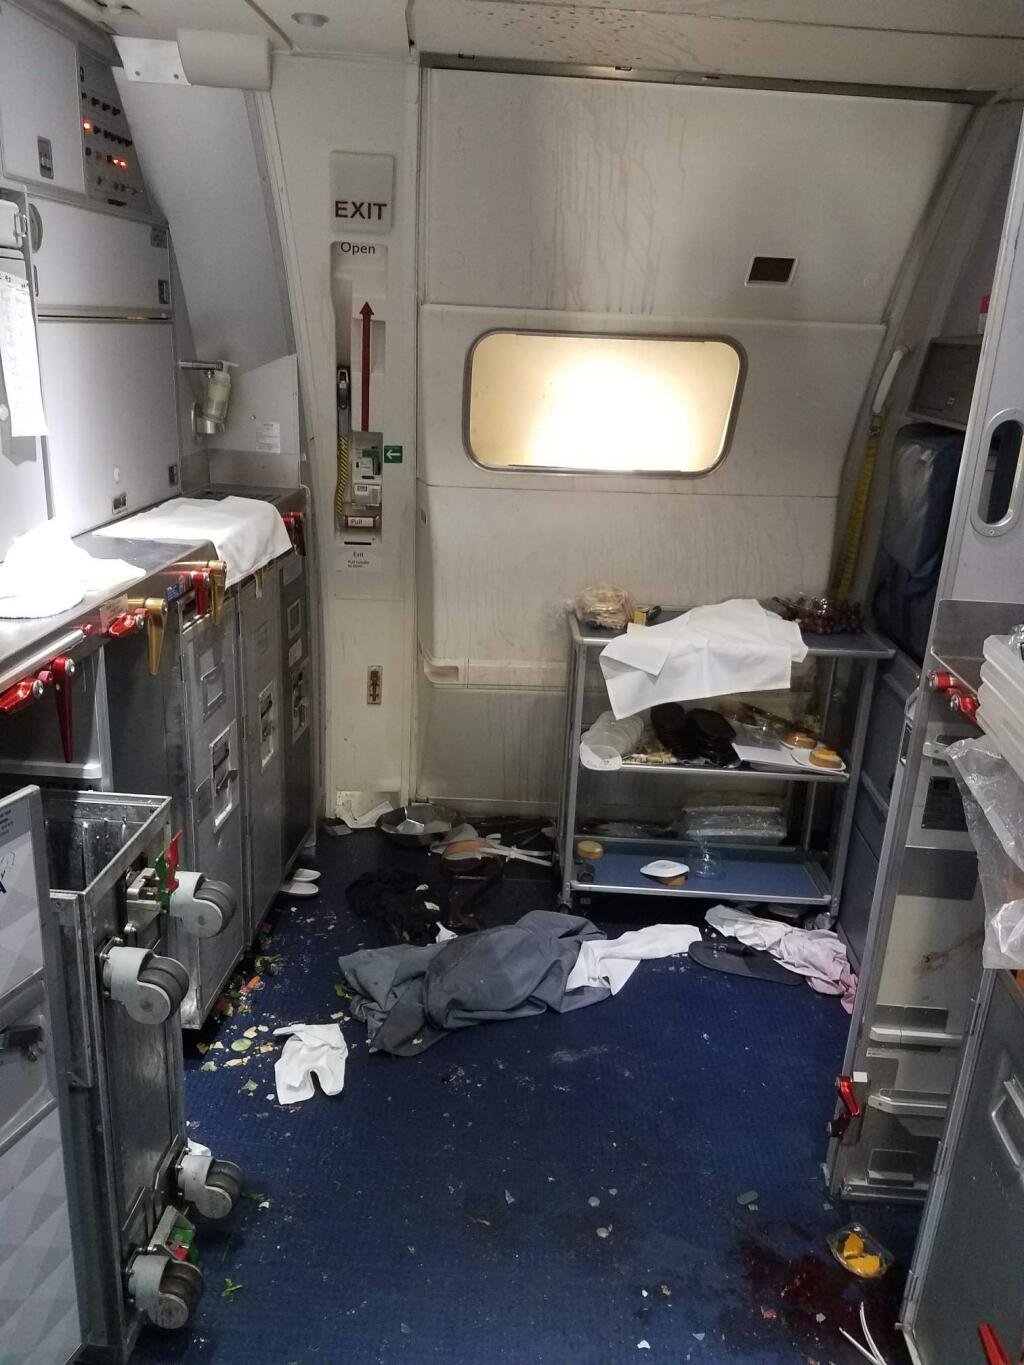 This Friday, July 7, 2017 photo taken the FBI and released via the U.S. Attorney's Office in Seattle shows the aftermath of a cabin on Delta Flight 129 from Seattle to Beijing, after authorities say flight attendants struggled with Joseph Daniel Hudek IV, a passenger who lunged for an exit door. The photo was included in a criminal complaint filed Friday, July 7. The passenger is charged with interfering with a flight crew and faces up to 20 years in prison. (FBI via U.S. Attorney's Office in Seattle via AP)